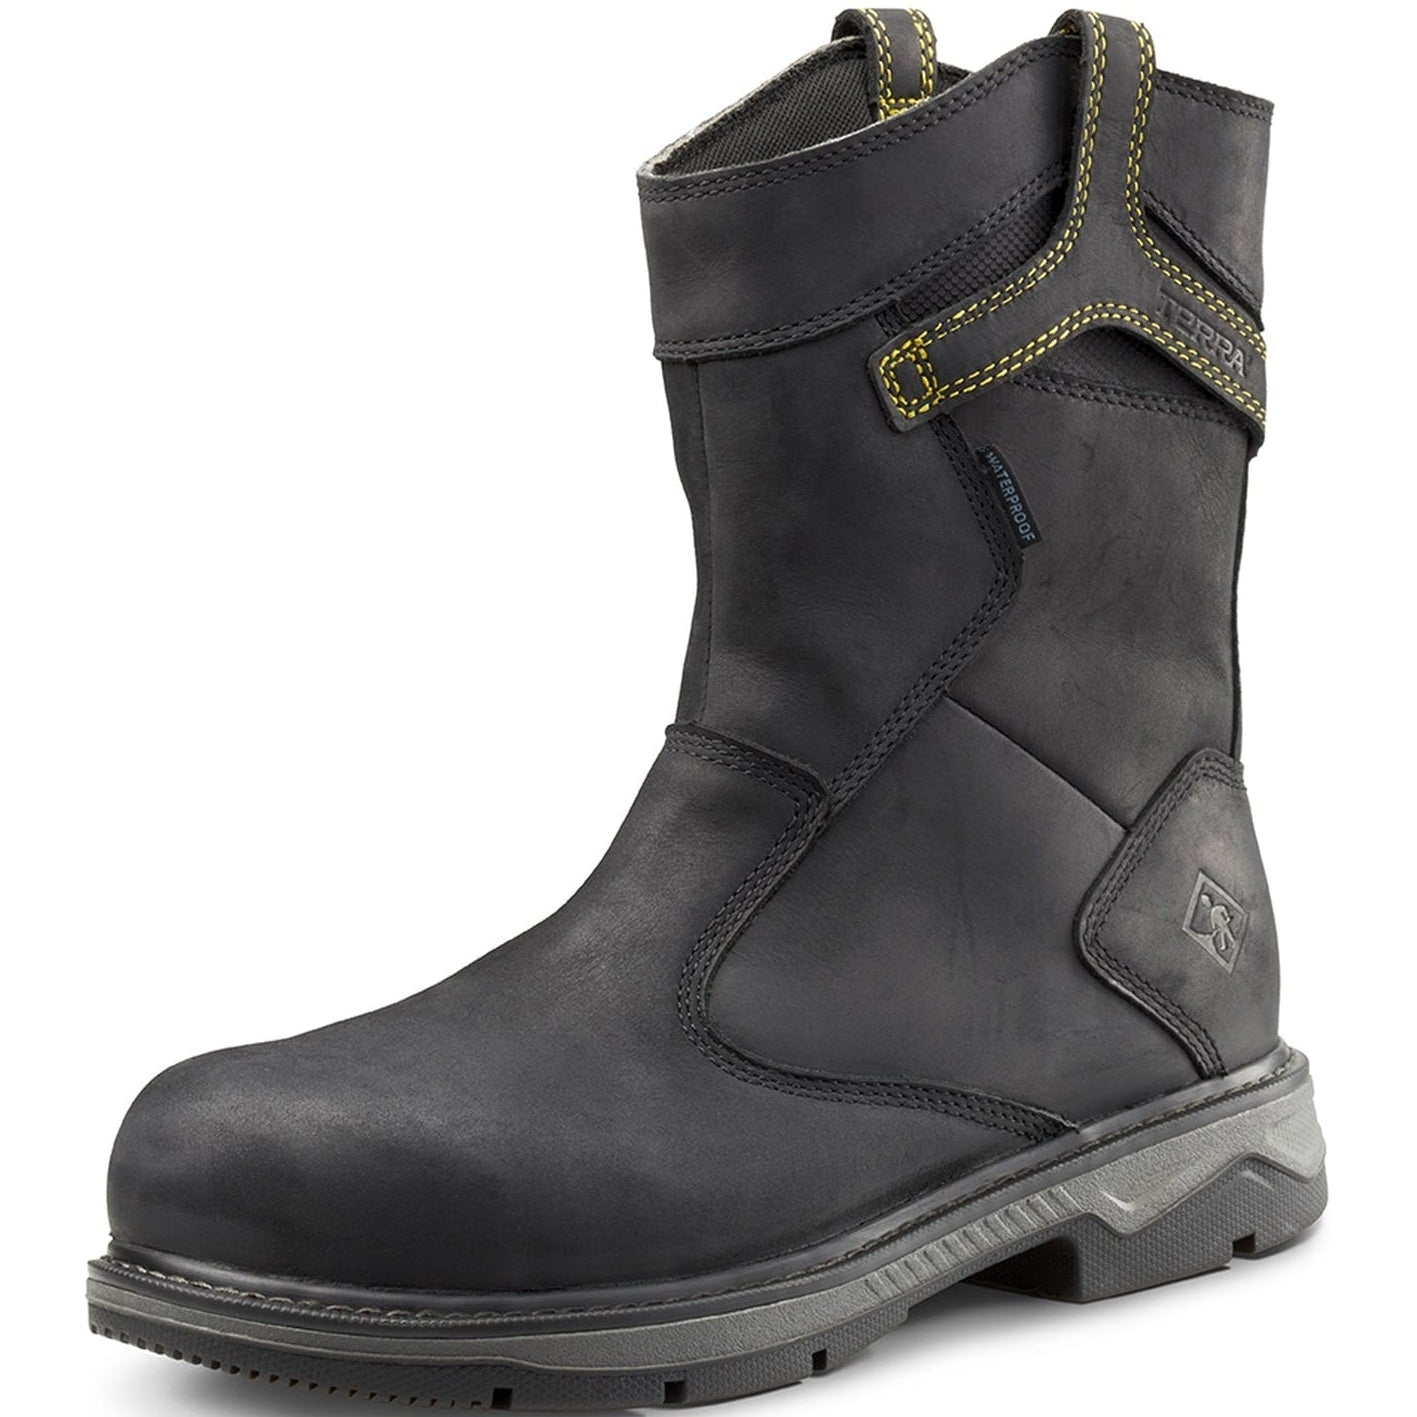 Terra Men's Patton AT Waterproof Pull-On Safety Work Boot -Black- 4TCBBK  - Overlook Boots